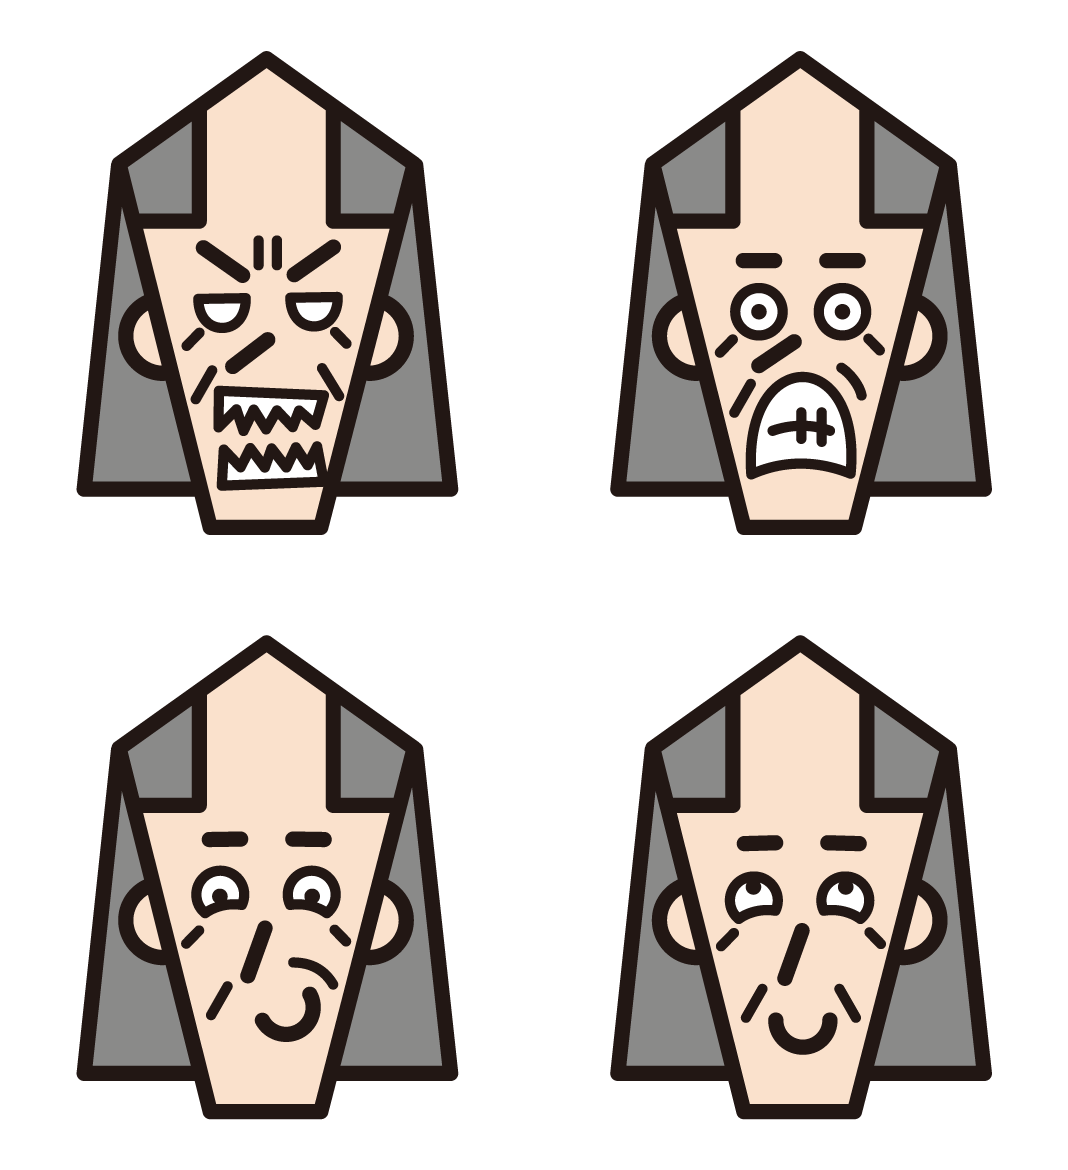 4 illustrations of the various facial expressions (long hair) of the old man